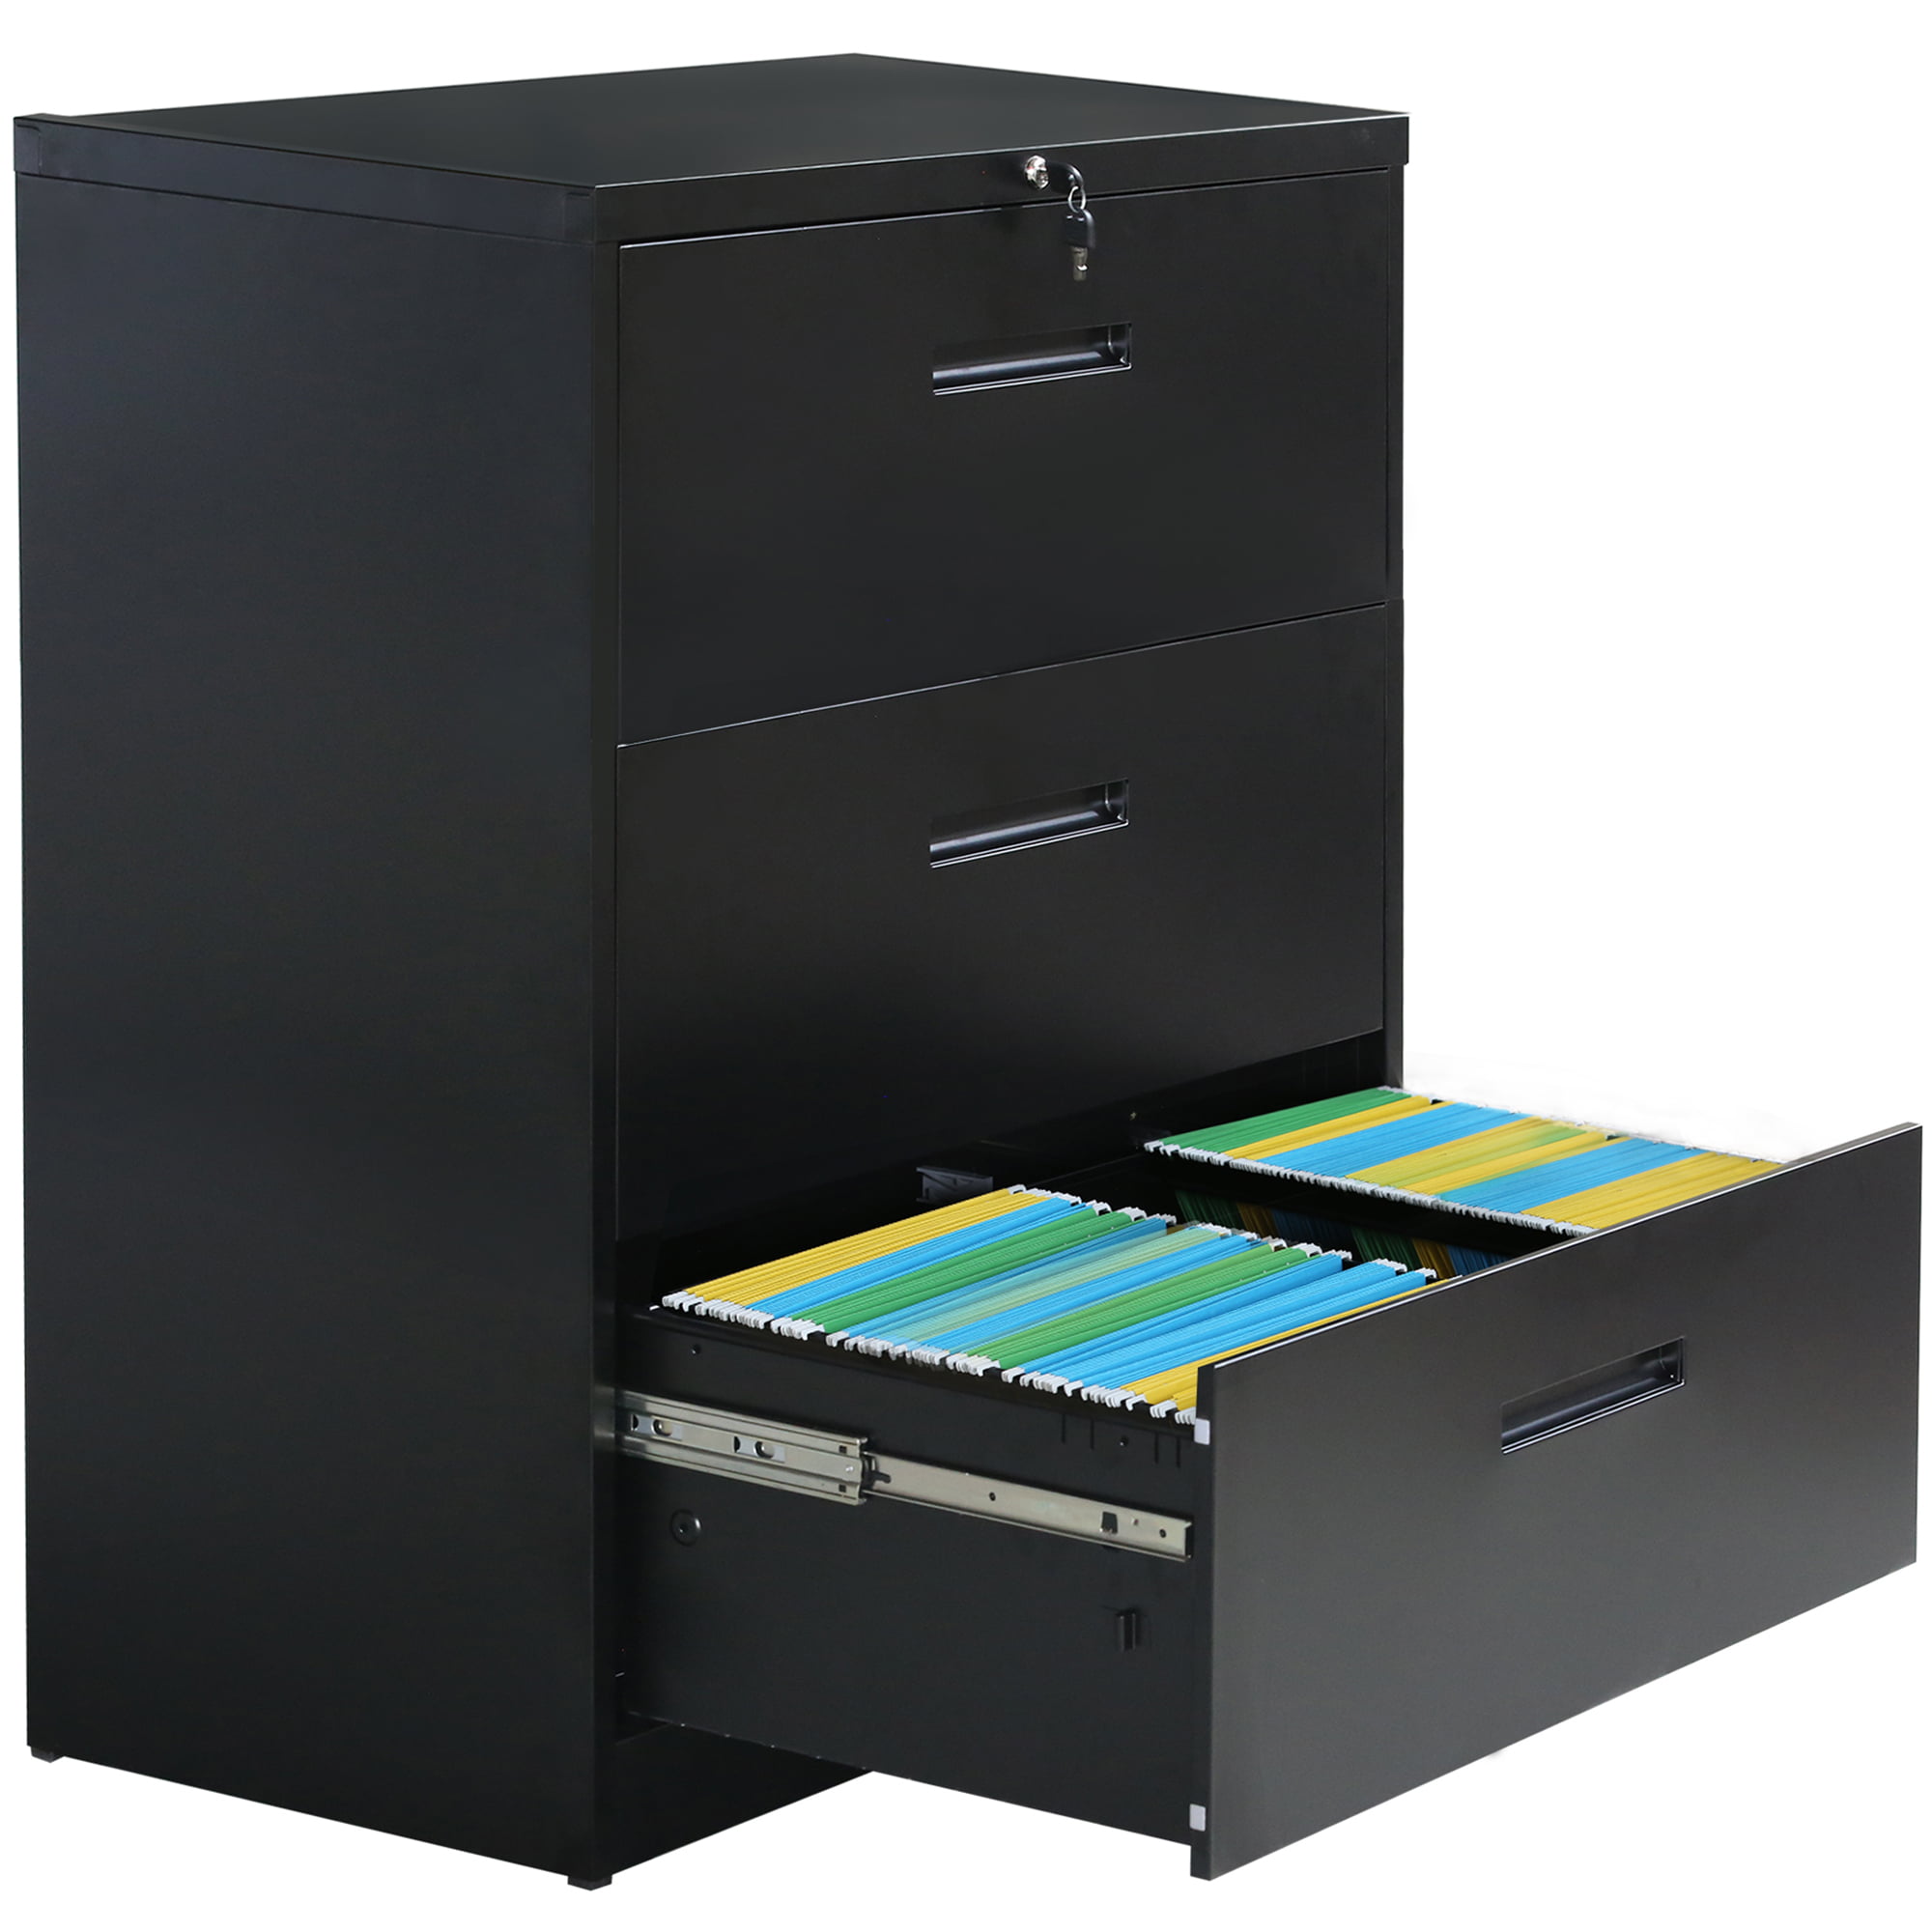 Lockable Filing Cabinet Metal Organizer Heavy Duty Hanging File Office Home Storage 4 Drawer lateral File Cabinet Black